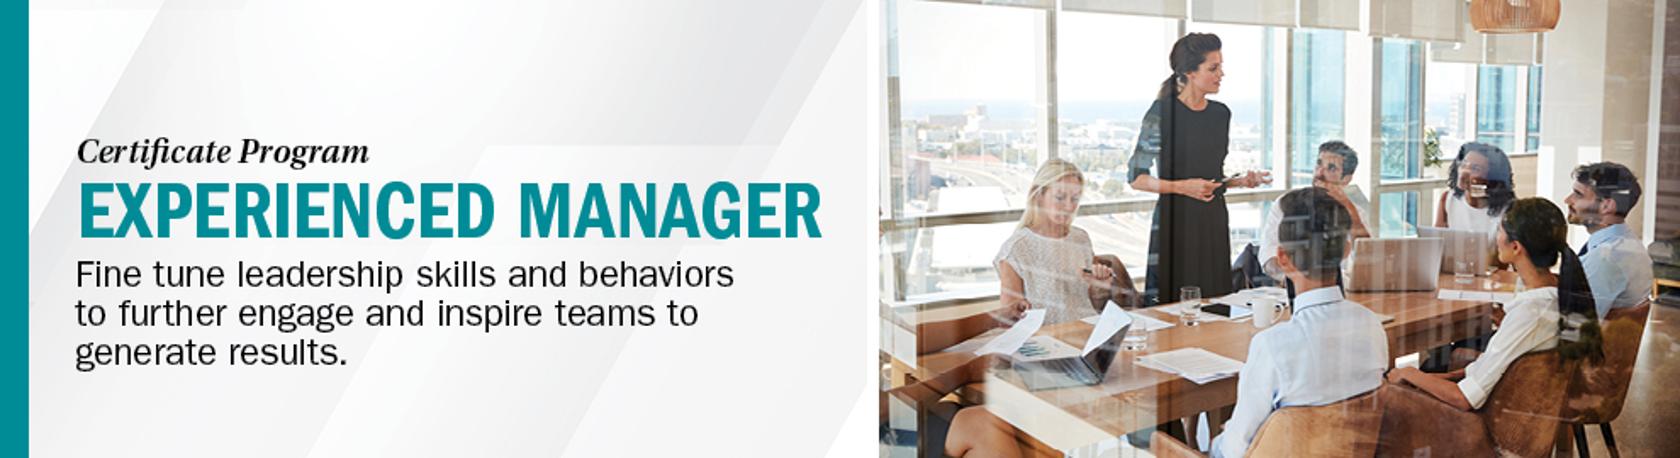 Experienced Manager Certificate Program